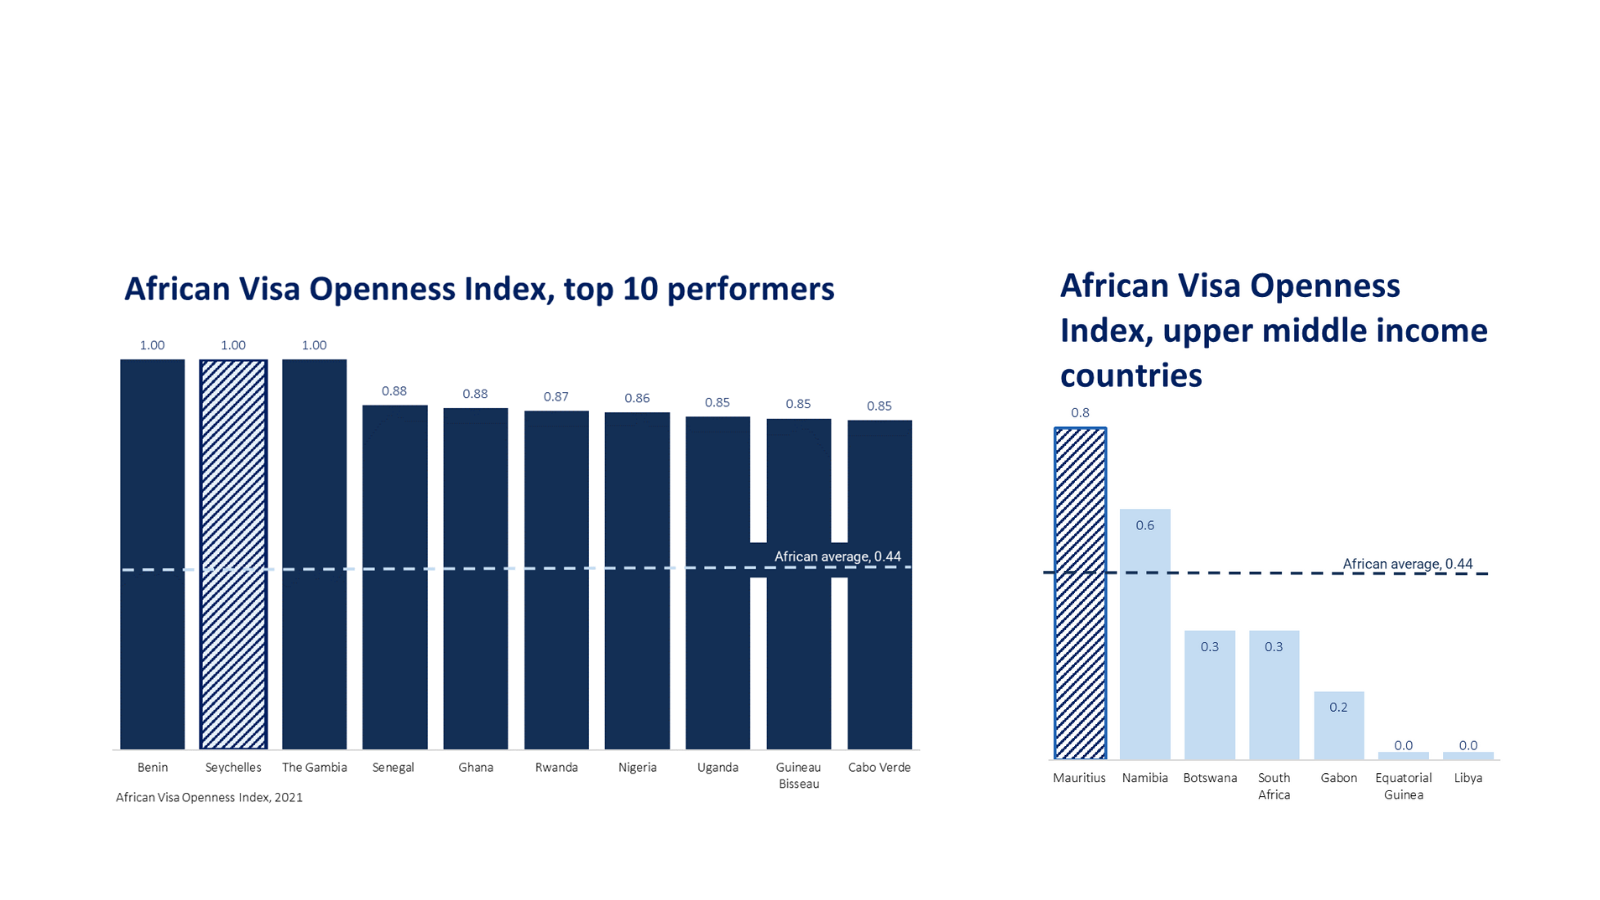 African Visa Openness Index